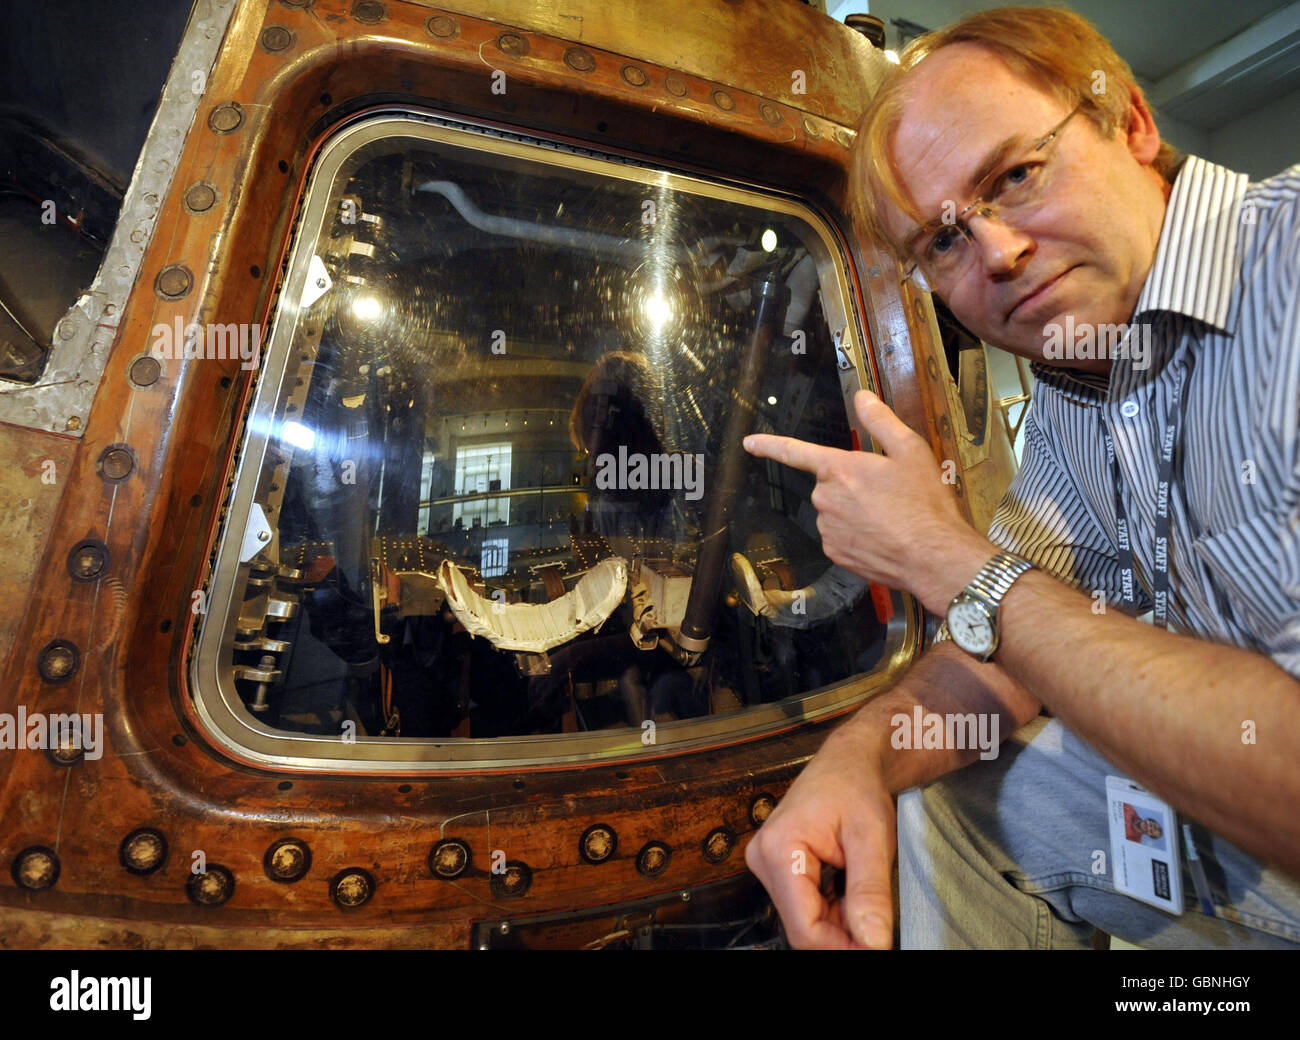 Doug Millard, senior space curator of the Science Museum in London, looks inside the Apollo 10 command module through the perspex cover which will be removed on Saturday May 23 so the public can see close inside for the first time. Stock Photo